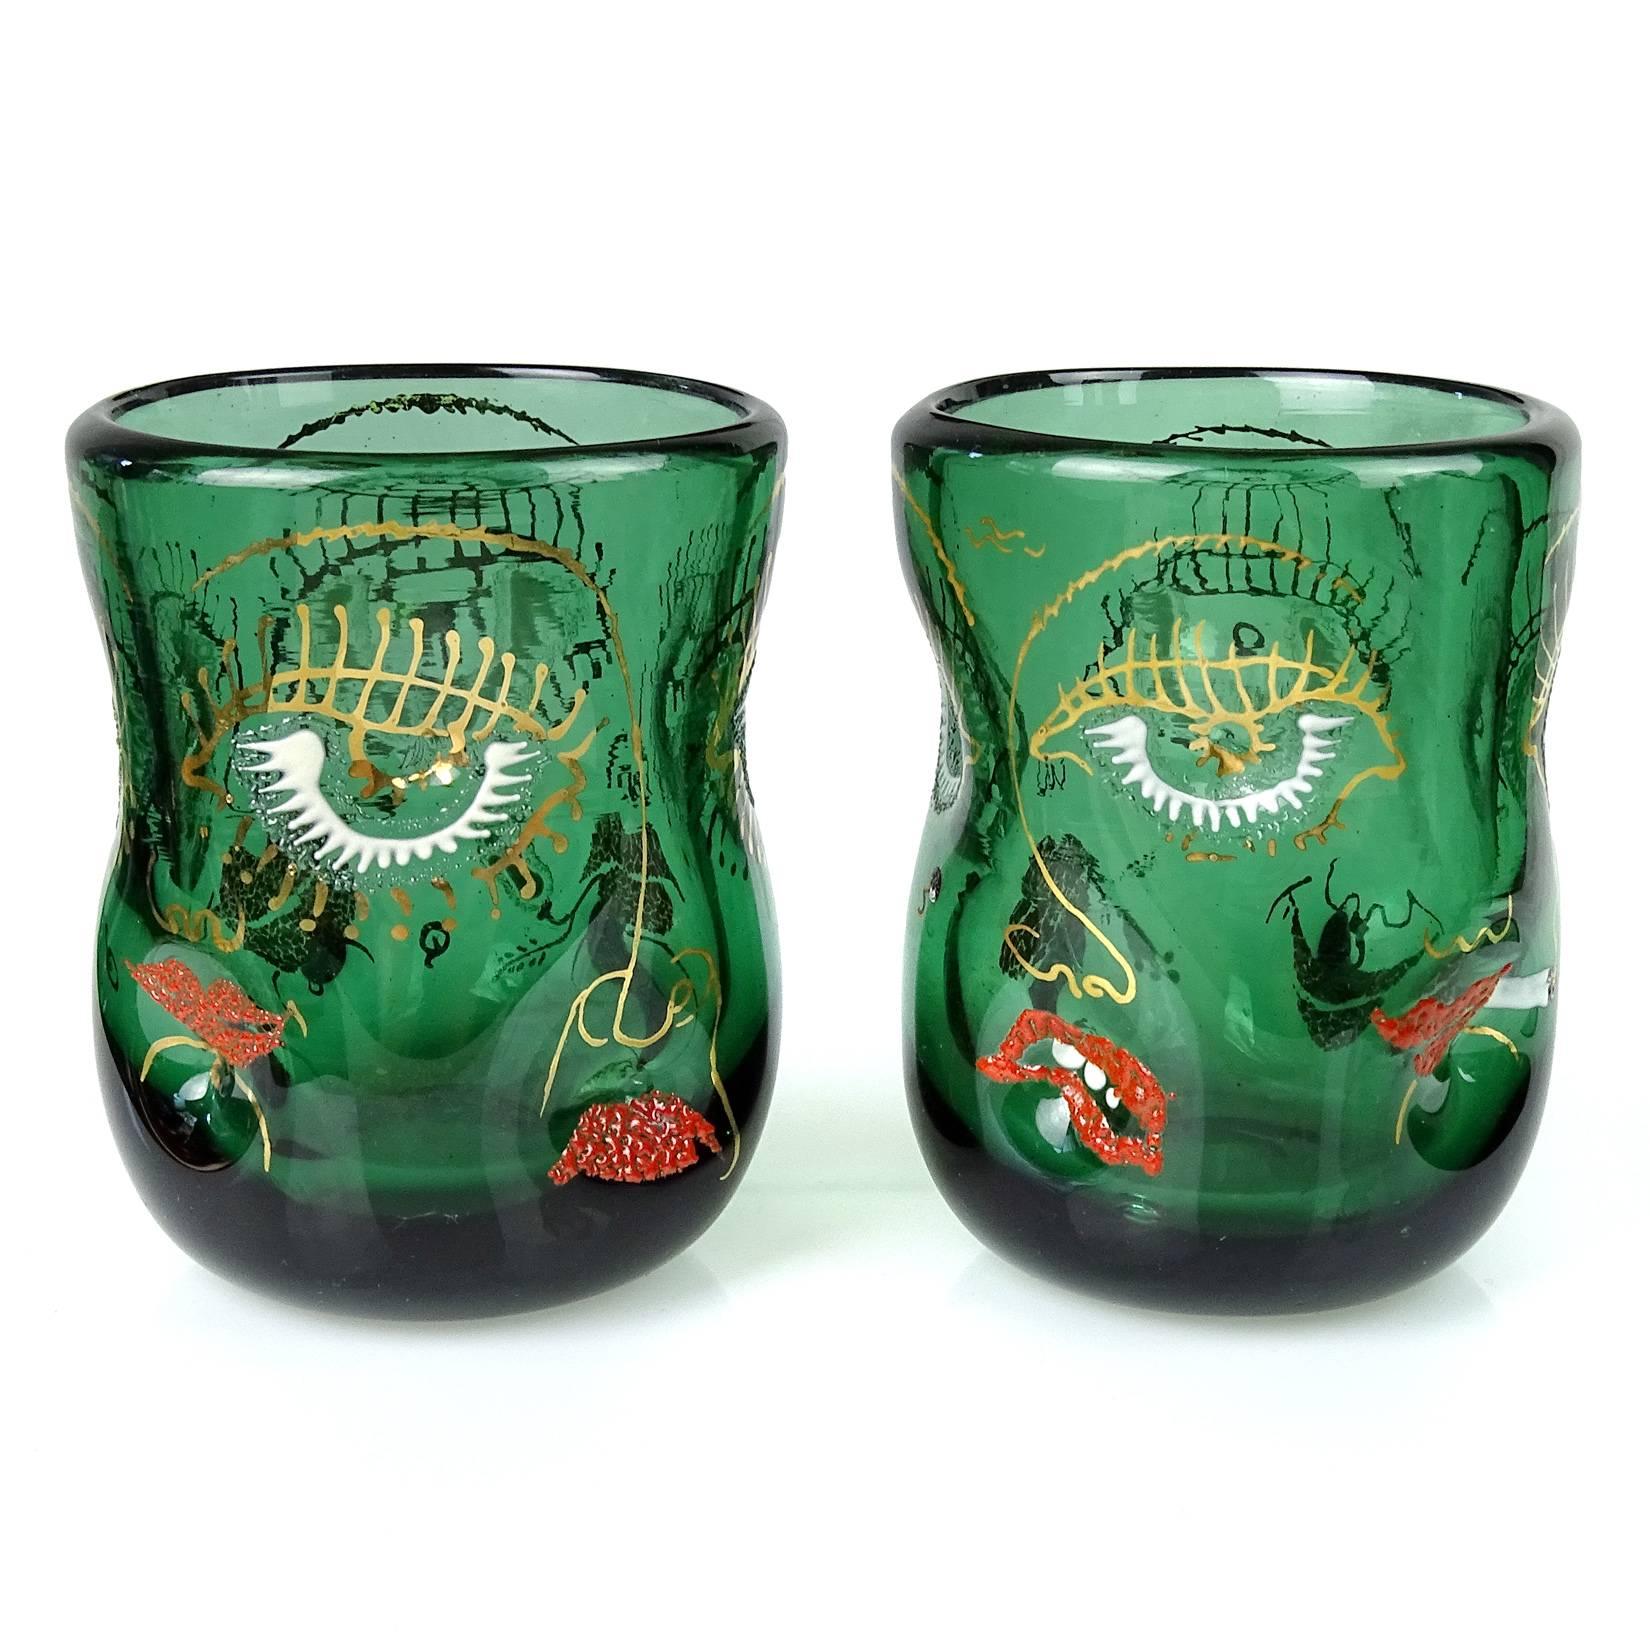 Free shipping worldwide! See details below description.

Very rare set of six Murano hand blown dark green Italian art glass drinking glasses with enamel and gold gilt 